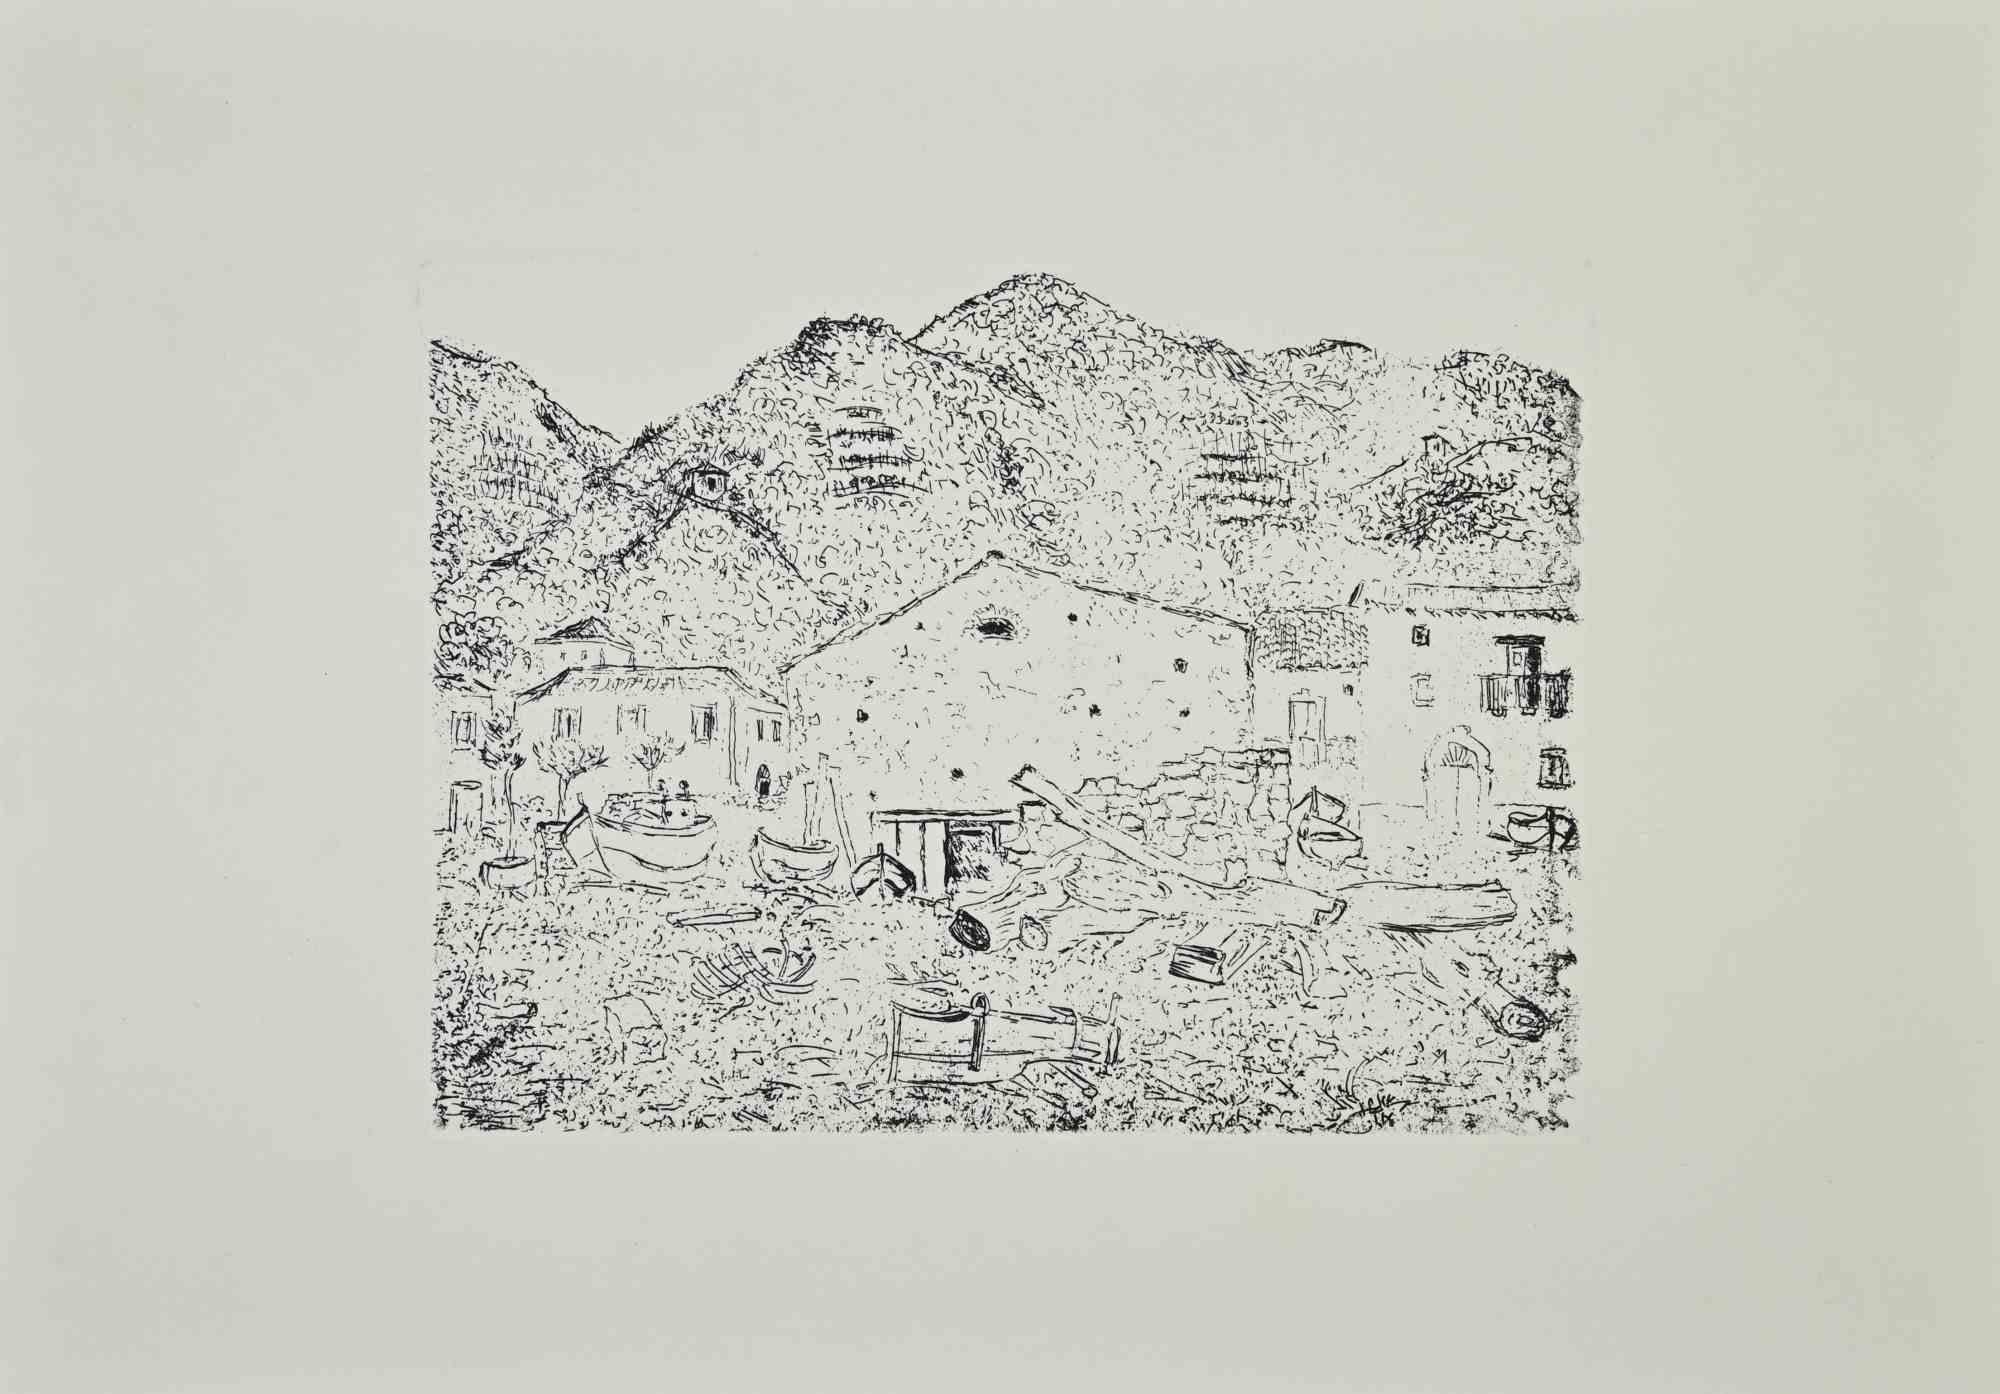 The Fisherman's village is an artwork realized  by Giovanni Omiccioli (February 25, 1901 – March 1, 1975).

Etching on cardboard.

The artist wants to define a well-balanced composition, through soft and delicate sign.

Good conditions.

Giovanni